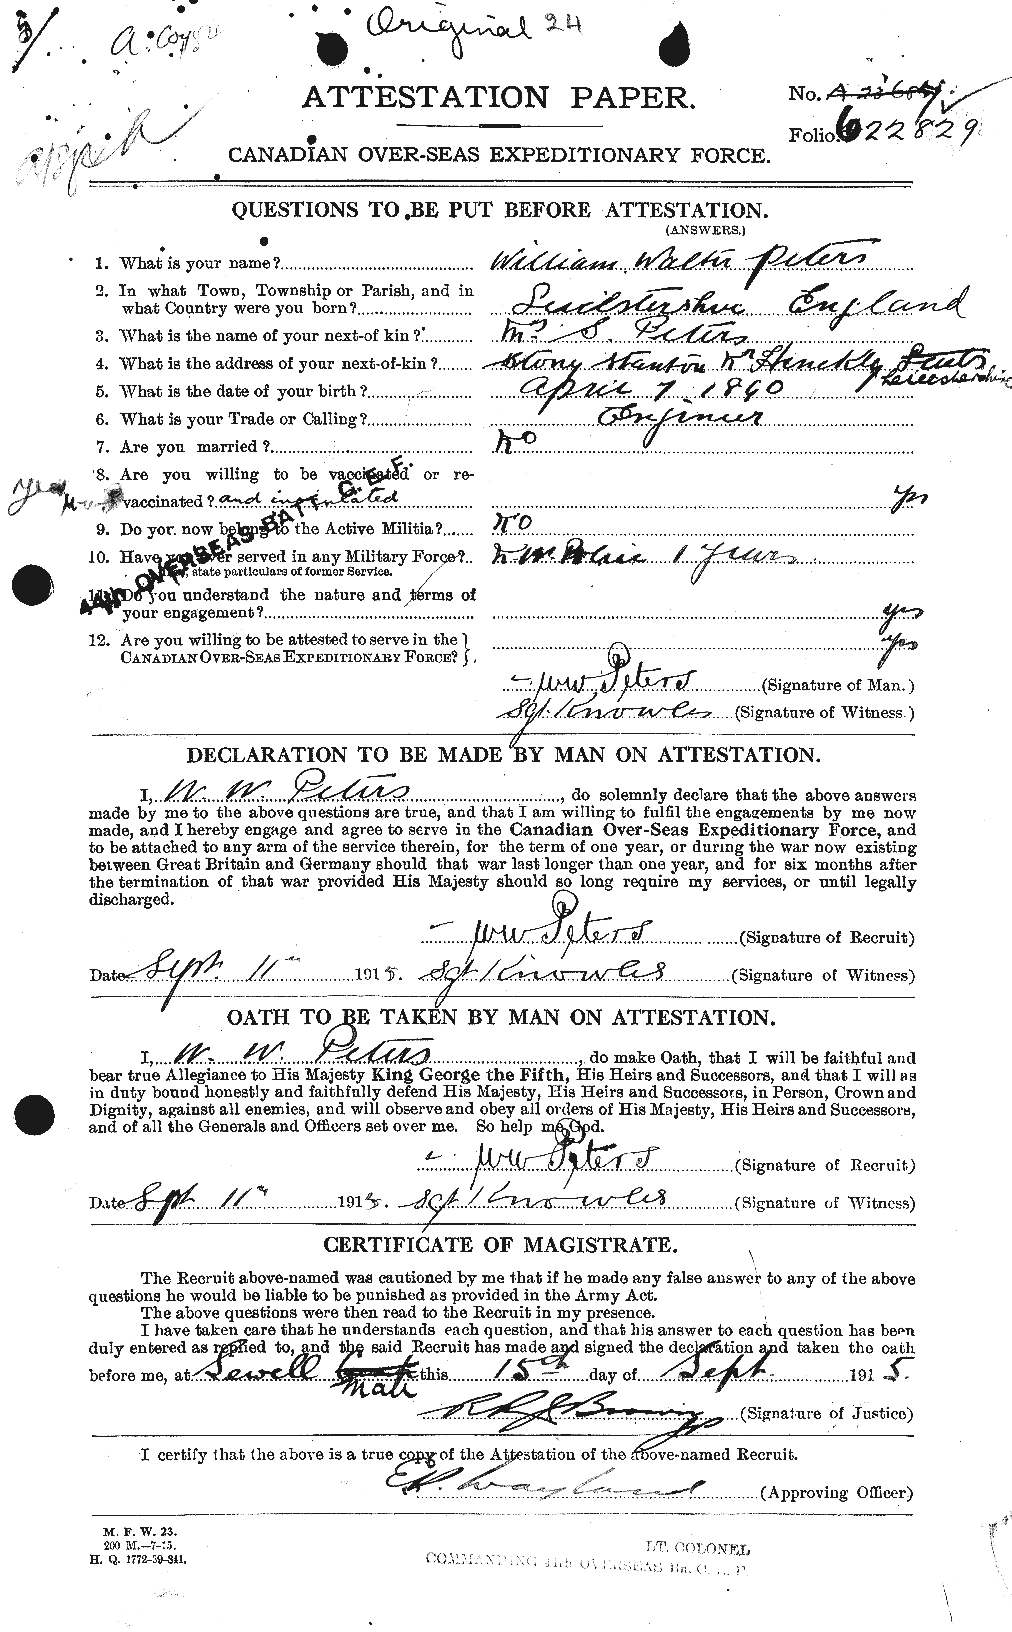 Personnel Records of the First World War - CEF 575662a